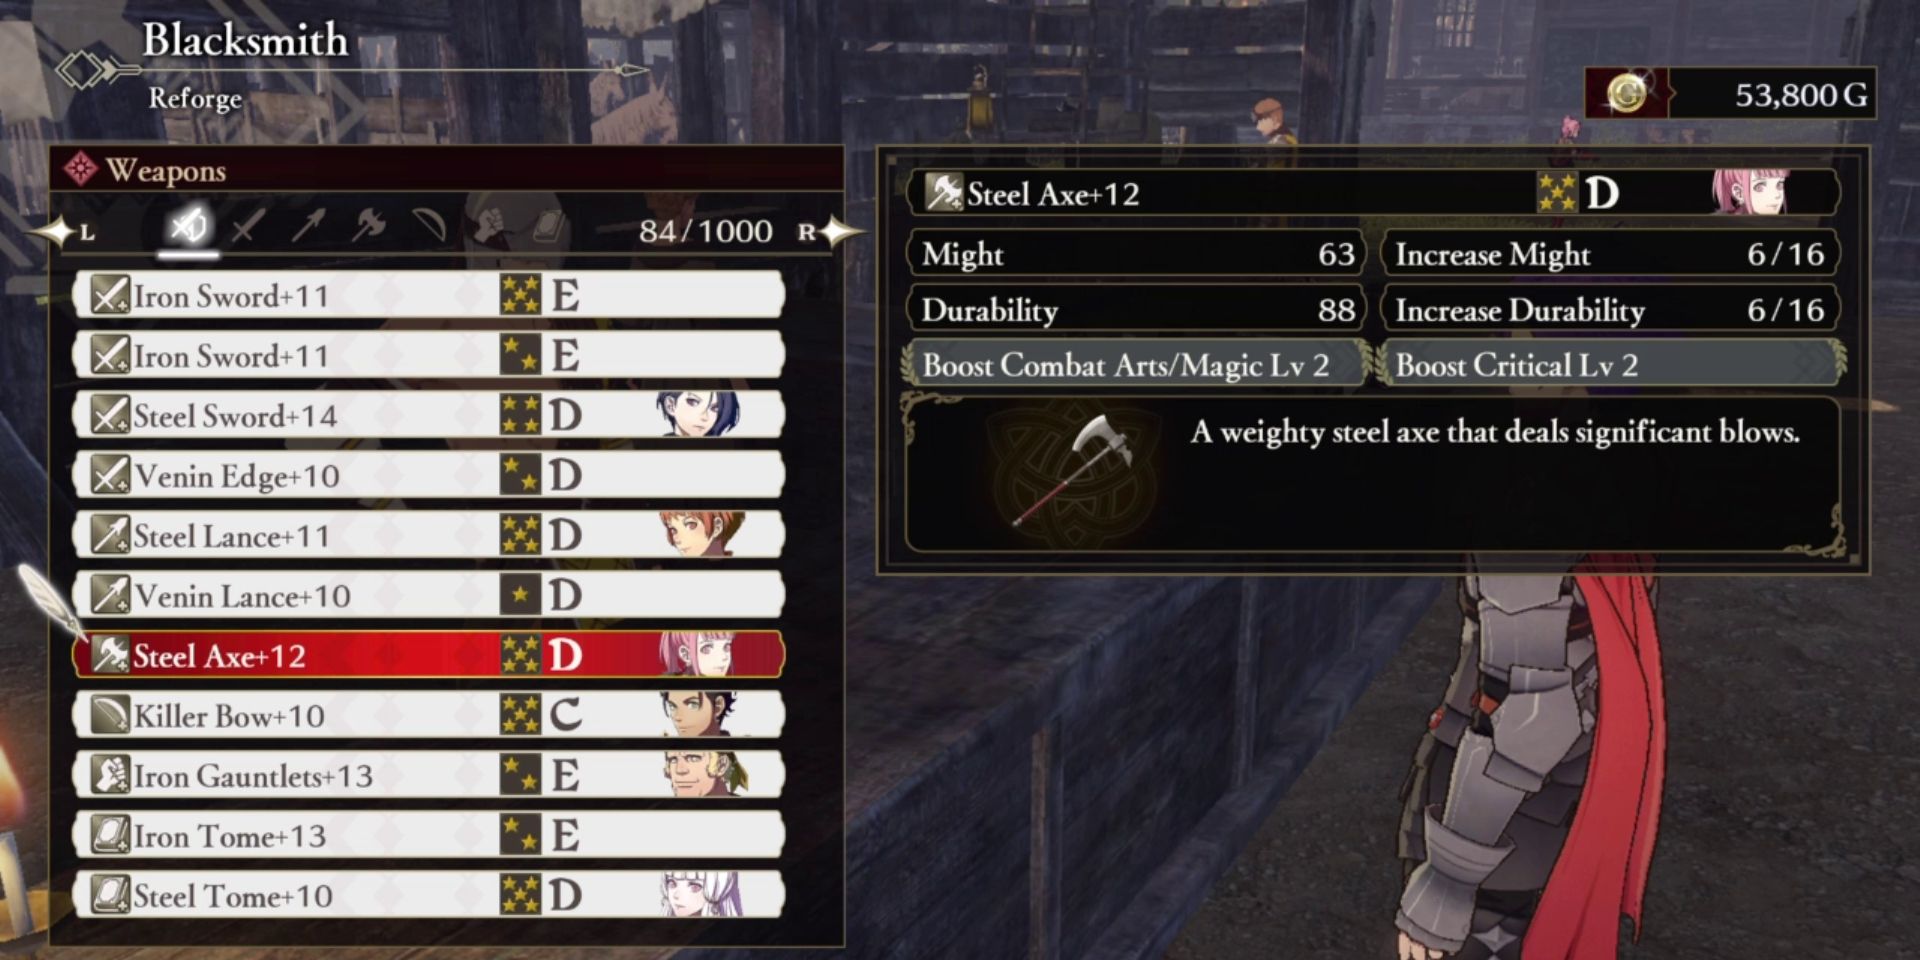 a blacksmith menu screen that shows a list of weapons to be reforged on the left and a description of that weapon on the upper right. an armored arm and red sash can be seen below the weapon description near the bottom right of the image